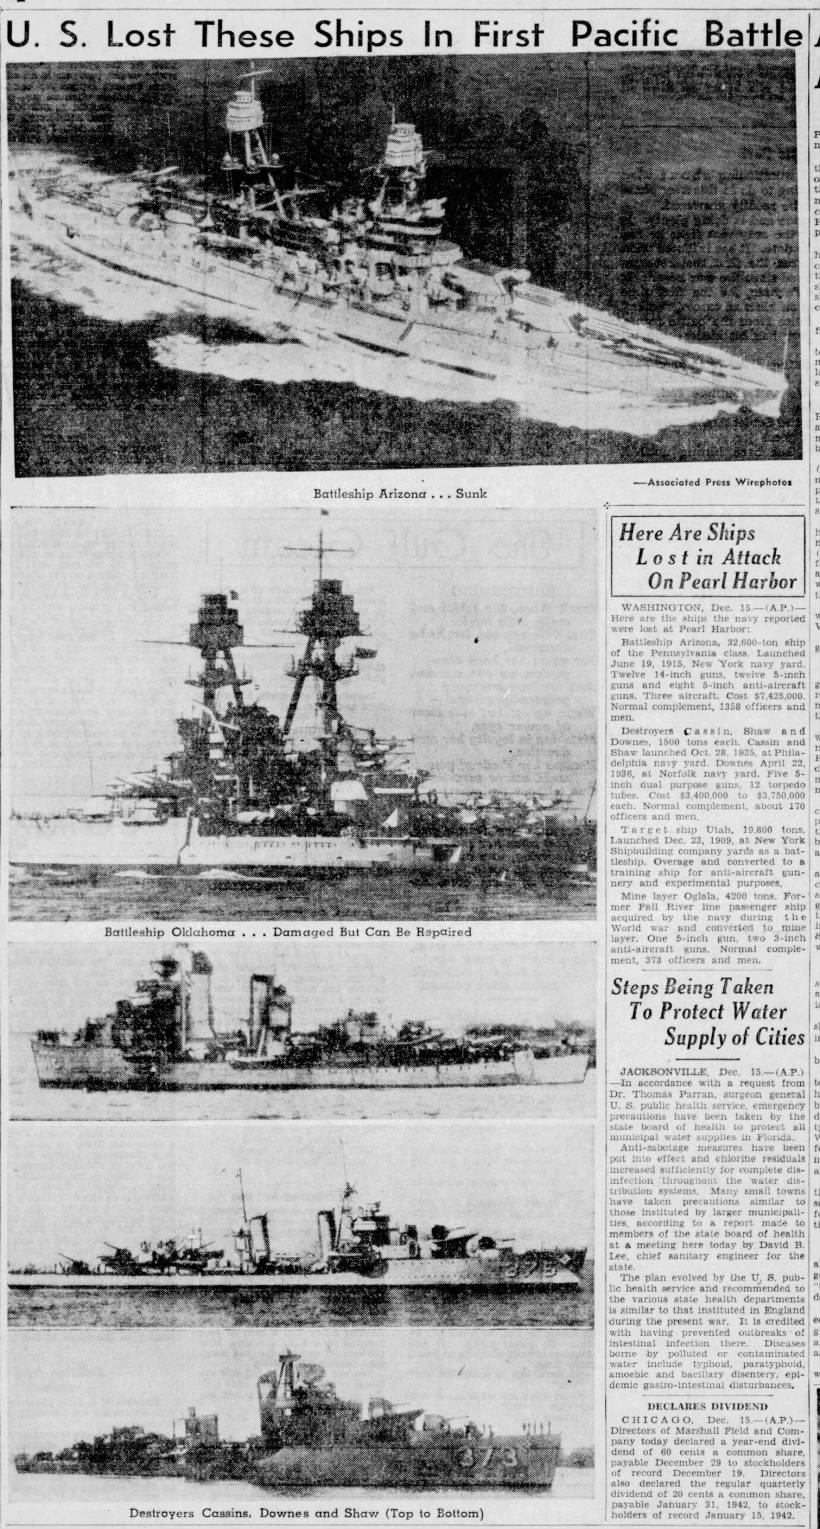 "U.S. Lost These Ships" article with photos of U.S. ships at Pearl Harbor during attack, 1941